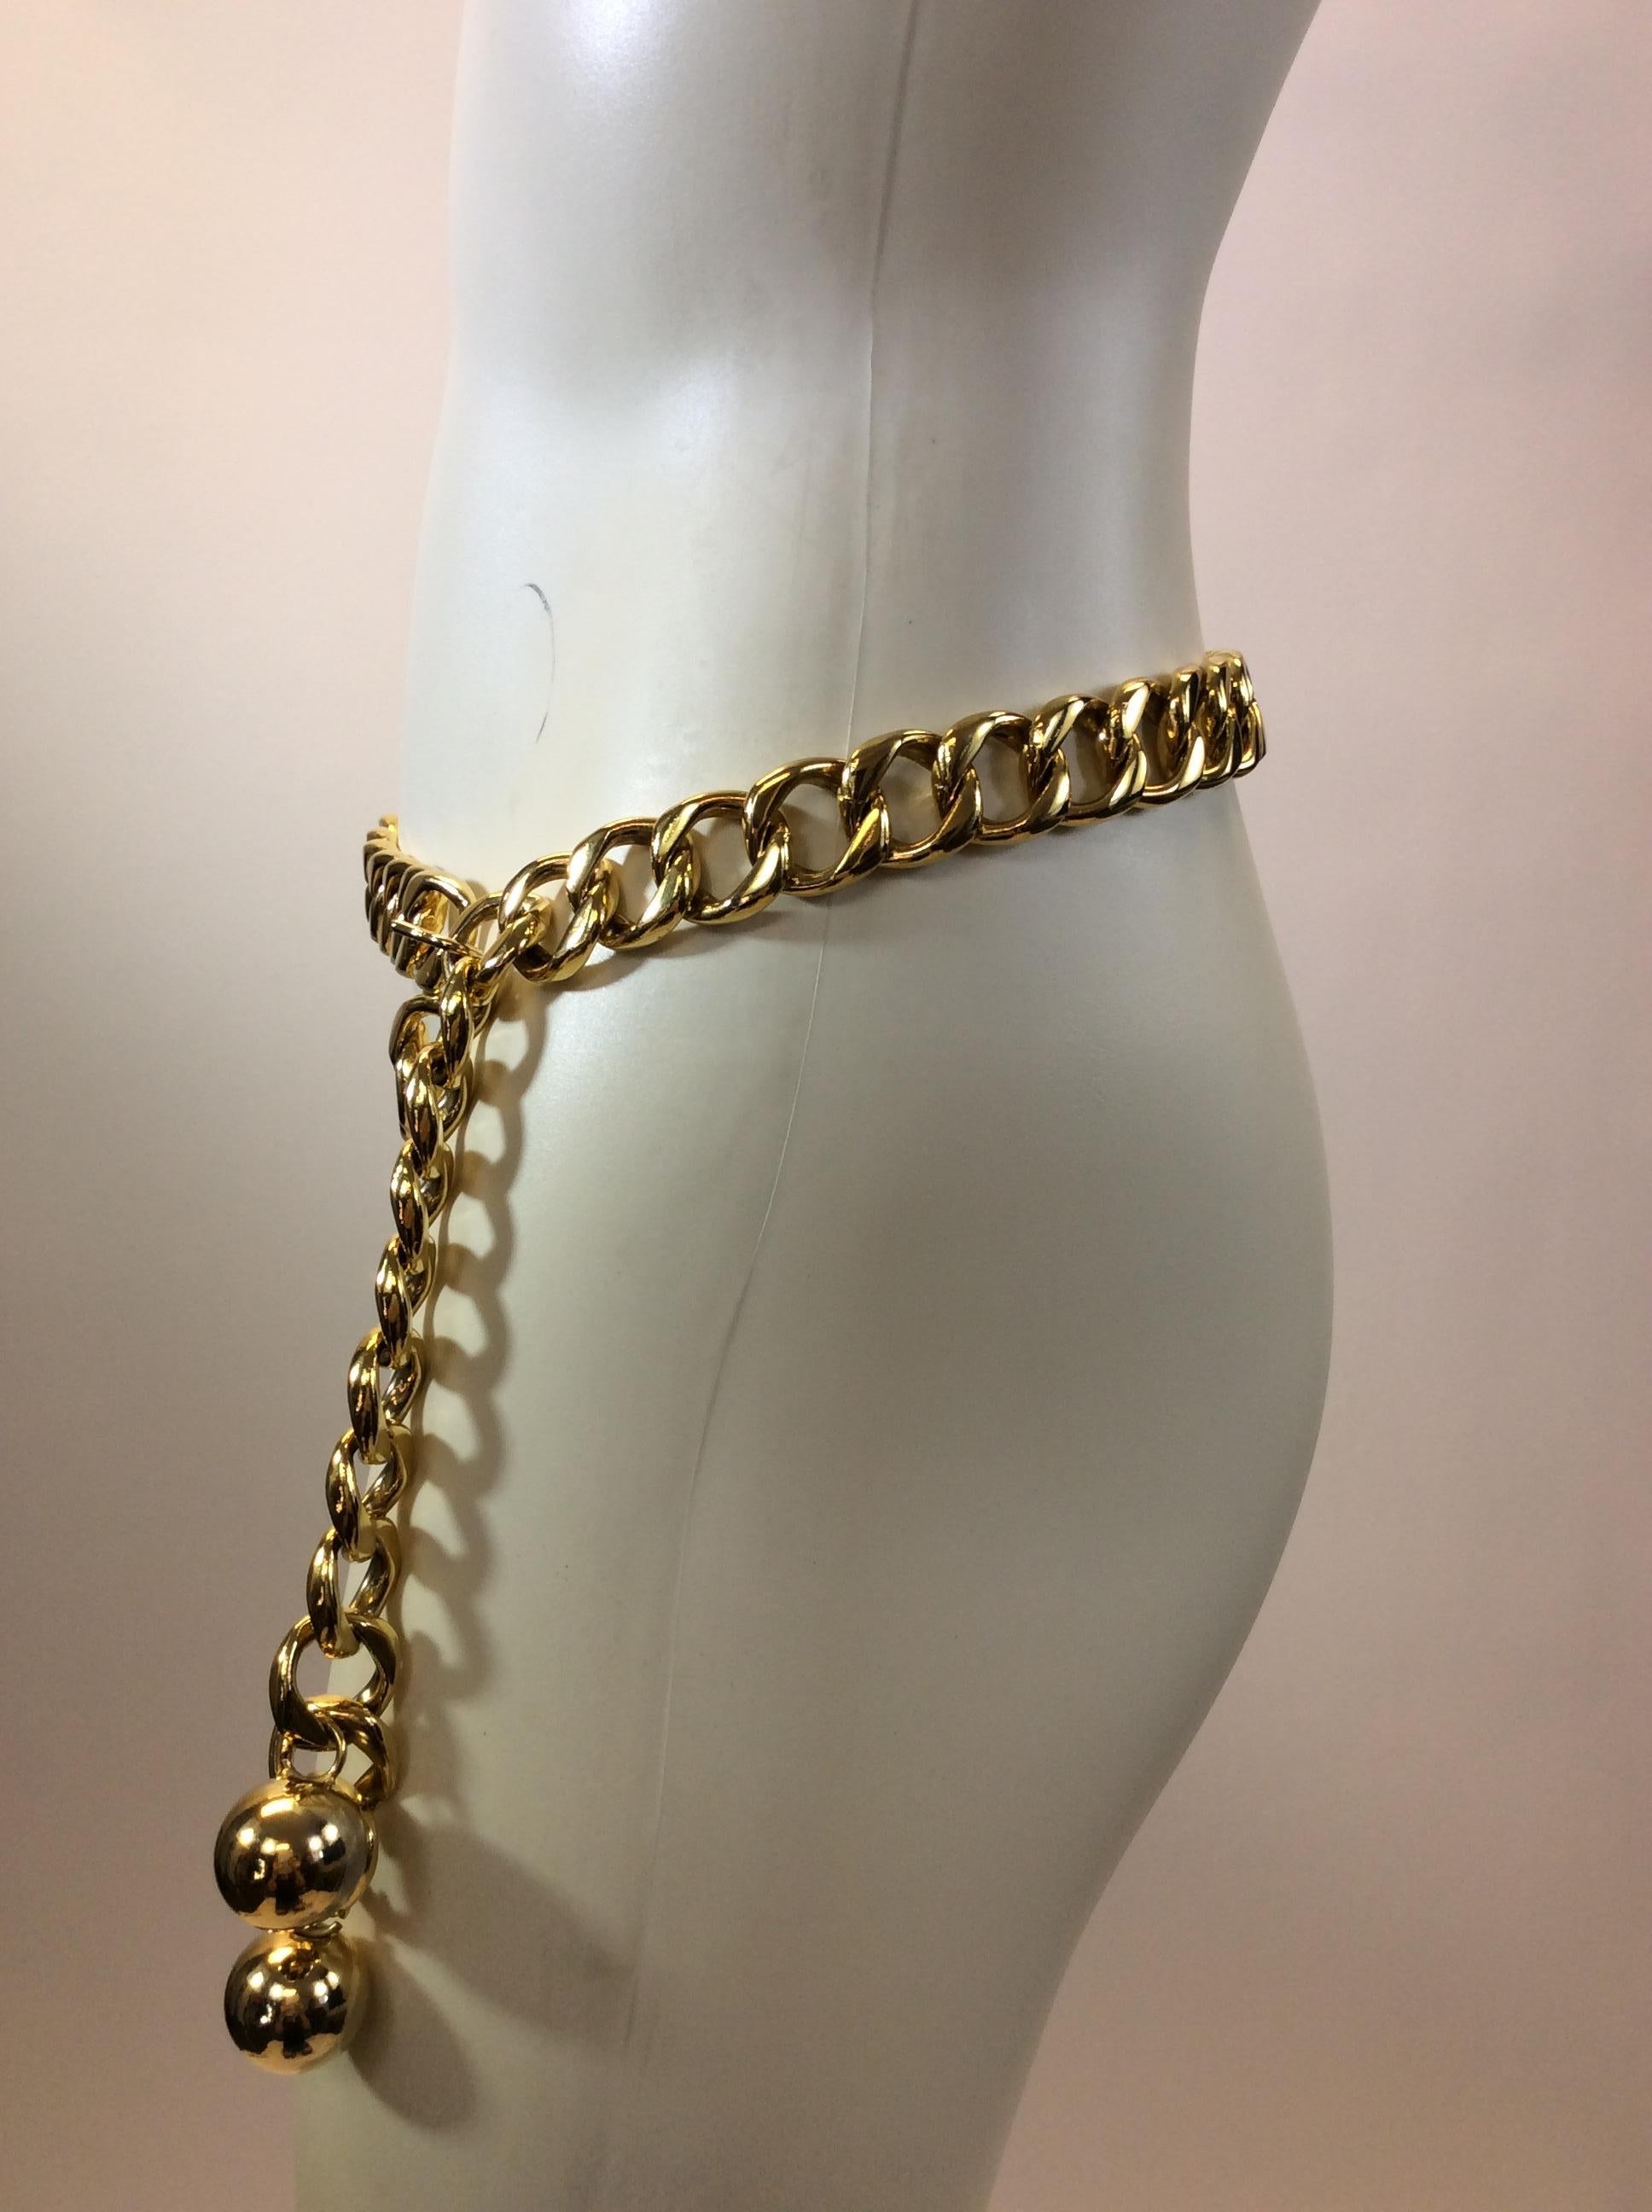 Chanel Gold Tone Chain Belt
$899
Total length 34”